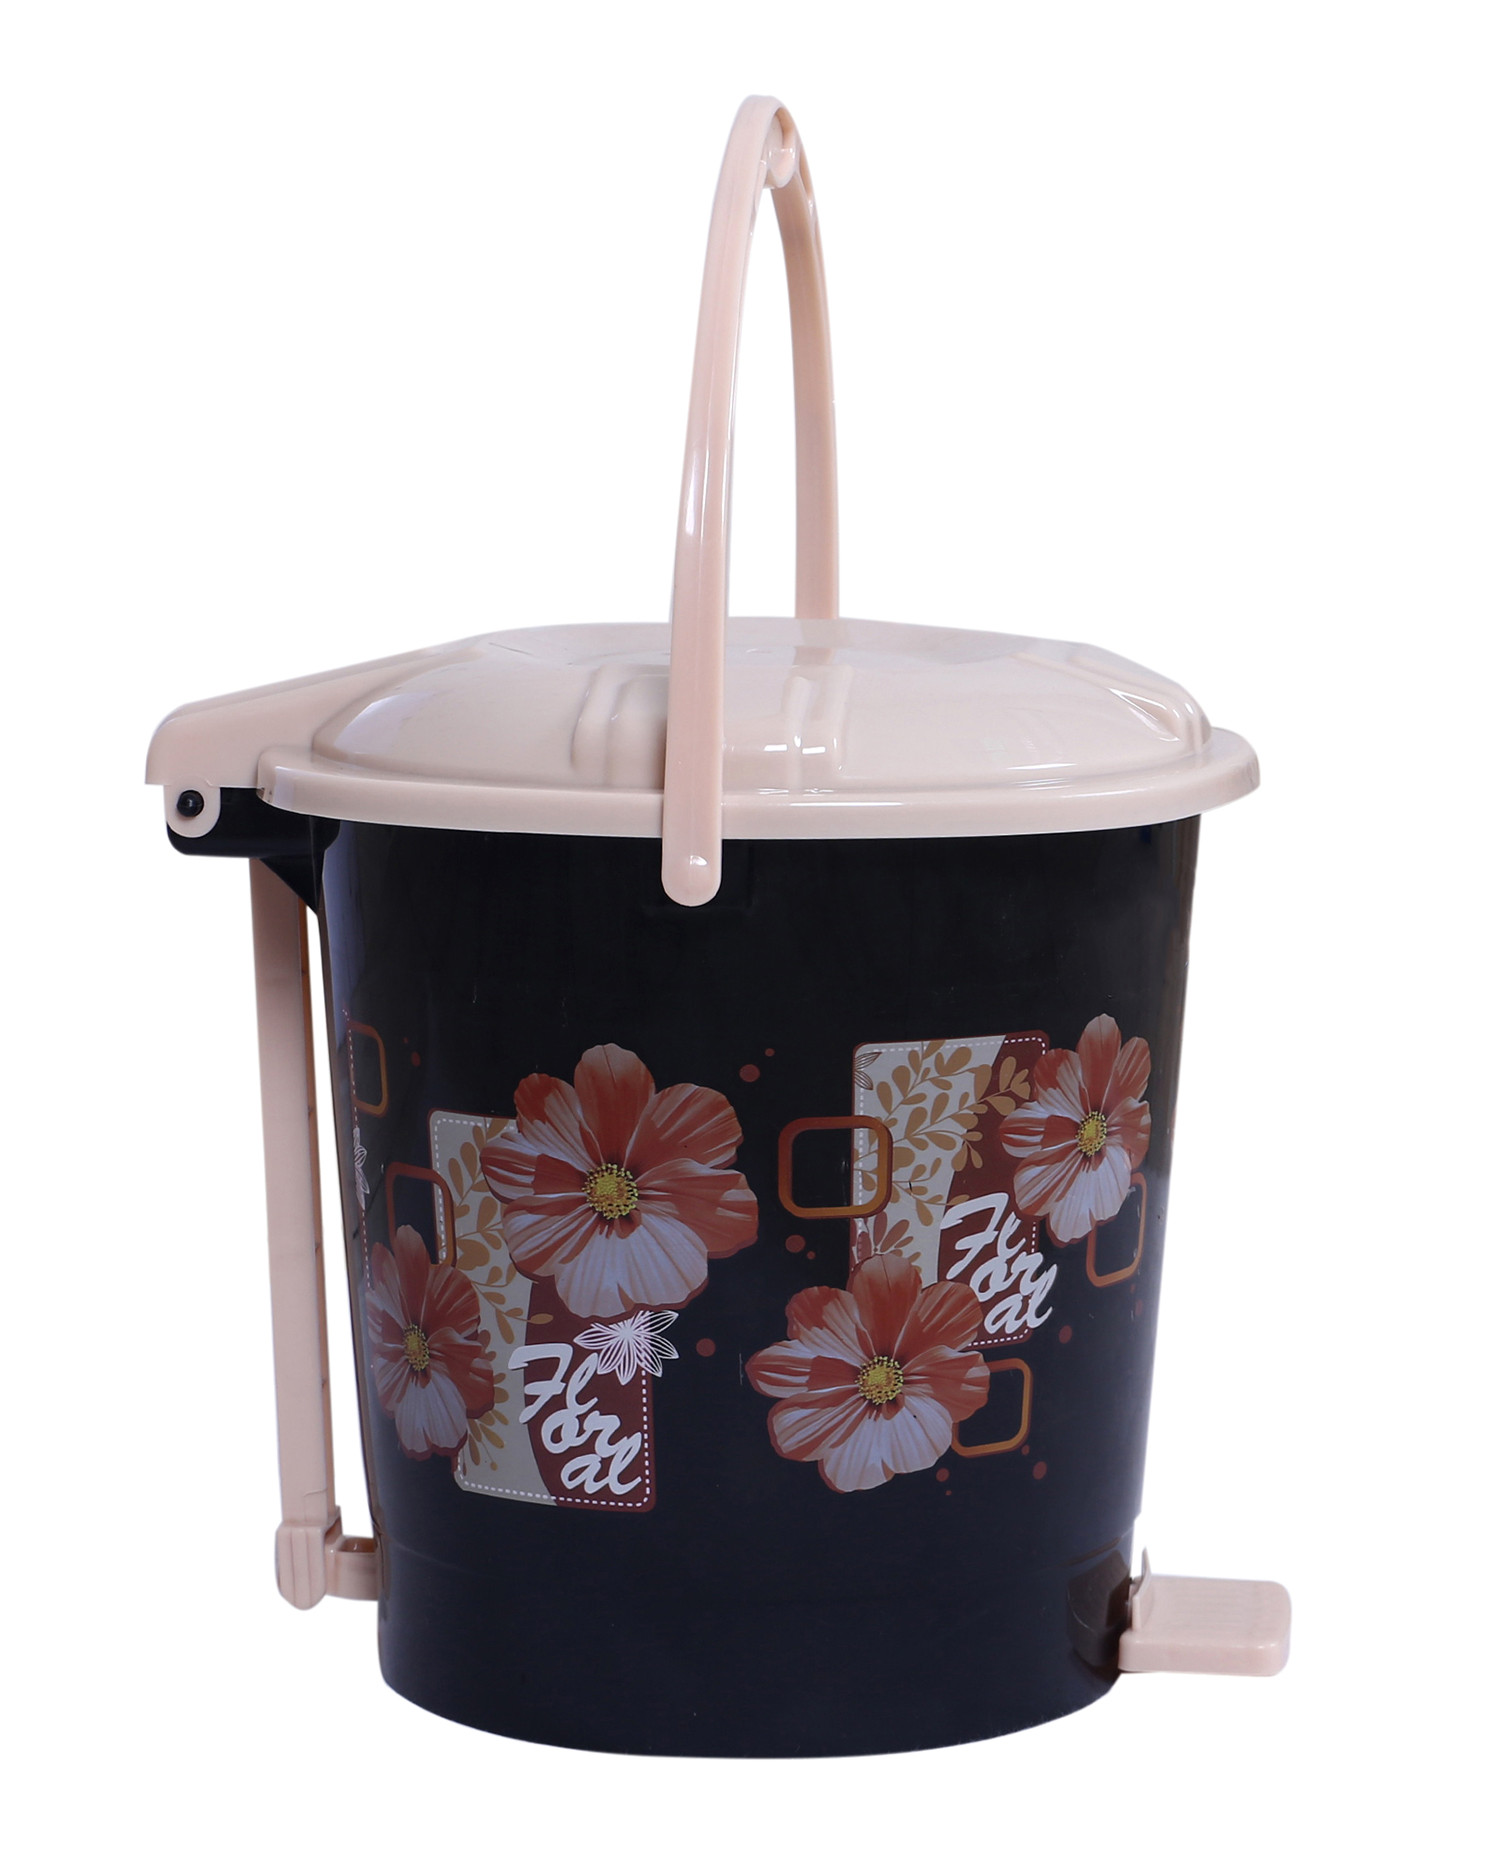 Kuber Industries Durable Floral Print Plastic Pedal Dustbin|Waste Bin|Trash Can For Kitchen & Home With Handle,10 Litre,Pack of 2 (Black)